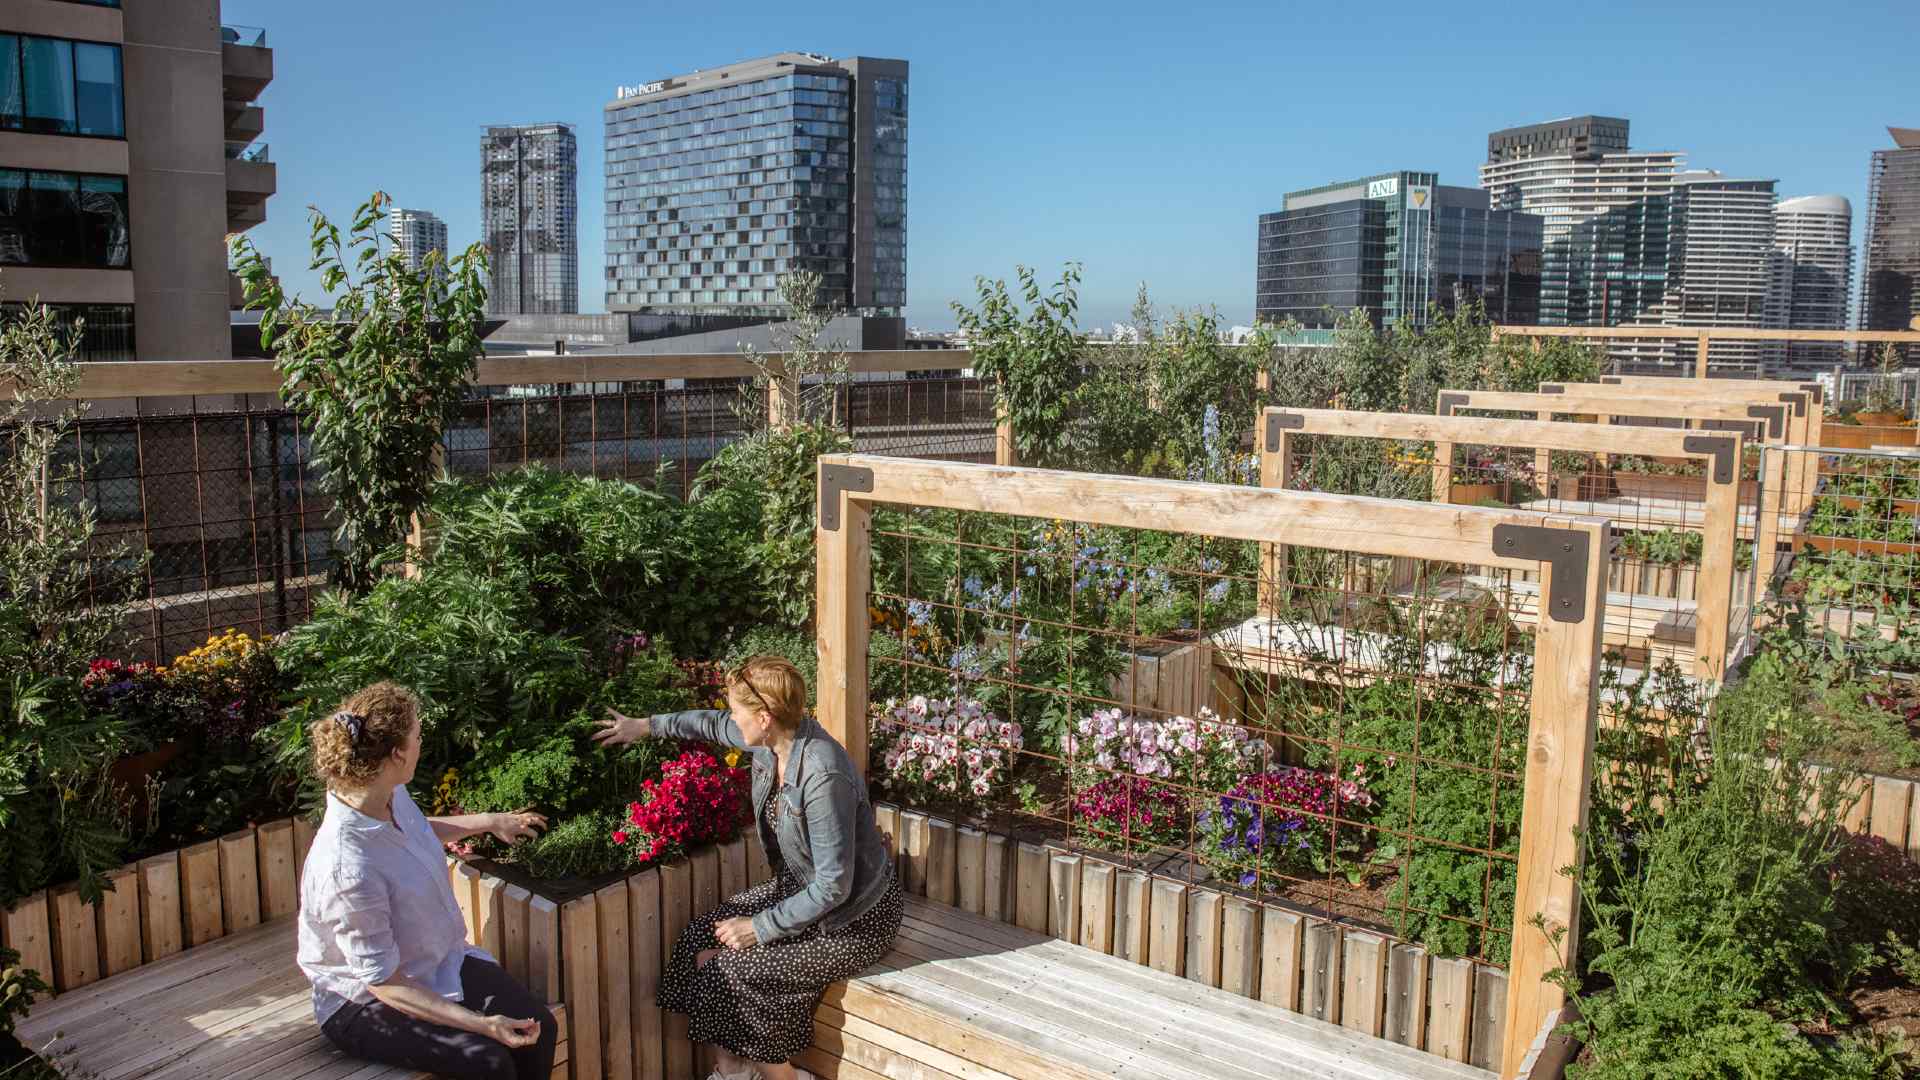 Skyfarm Is the New Urban Farm and Beacon of Sustainability Opening on a CBD Rooftop